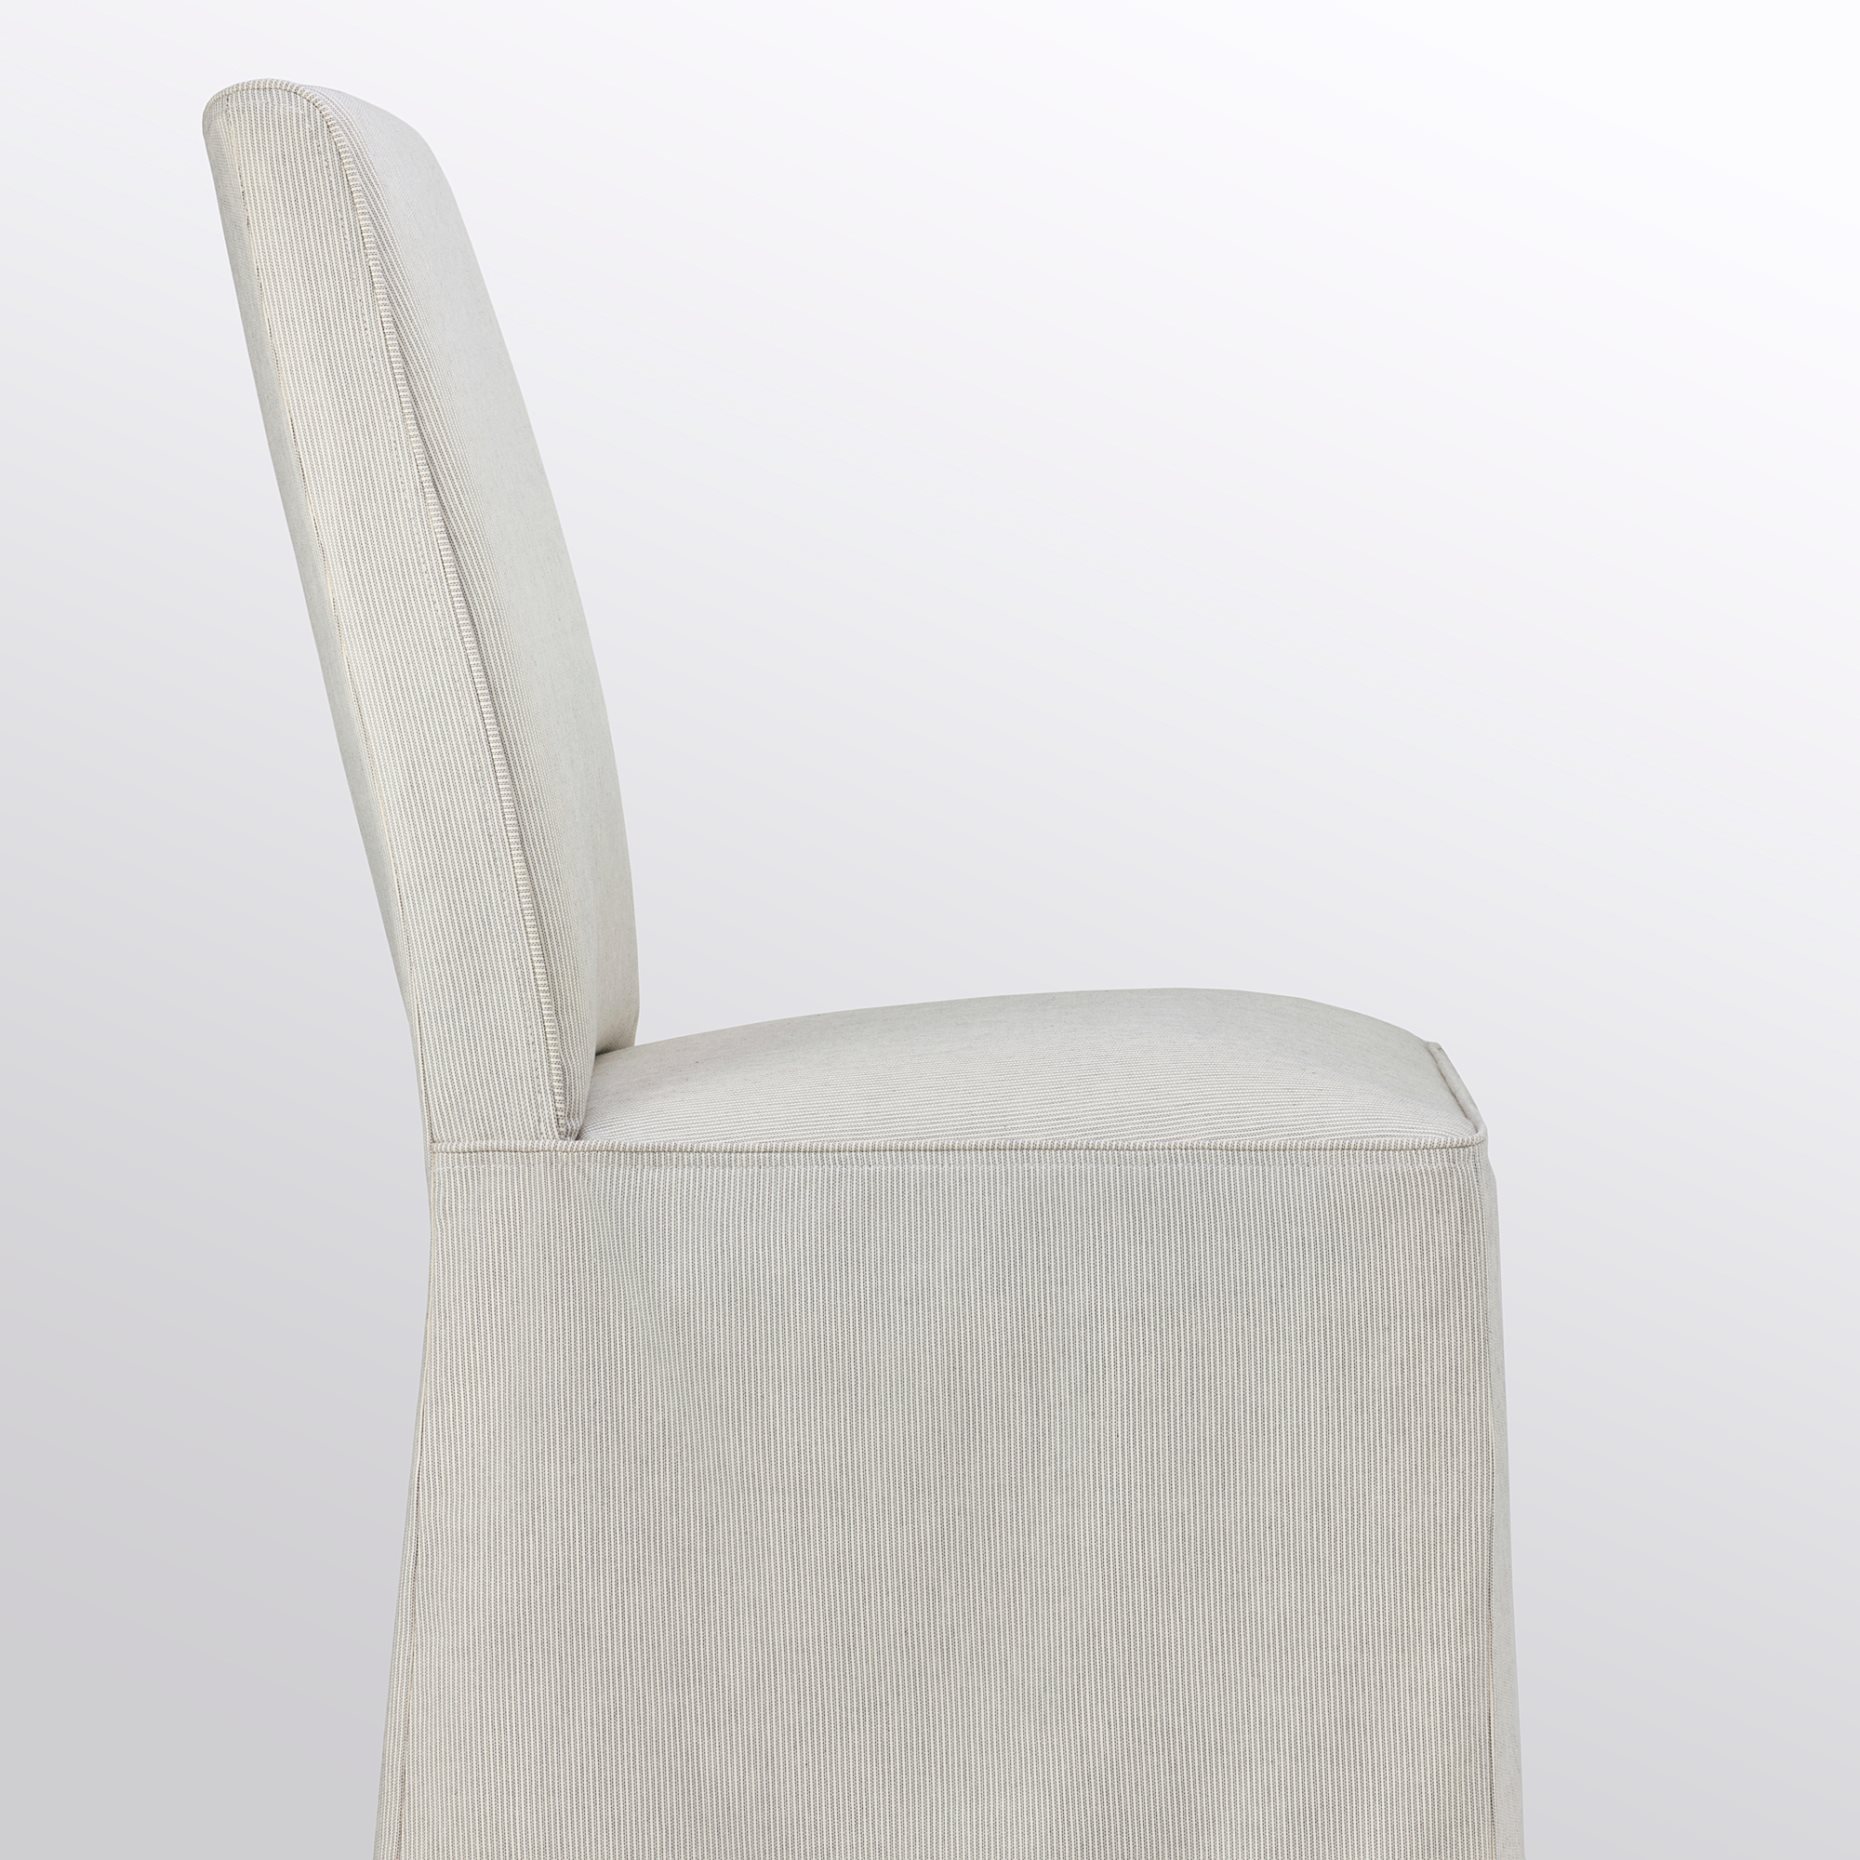 BERGMUND, chair with long cover, 693.842.51